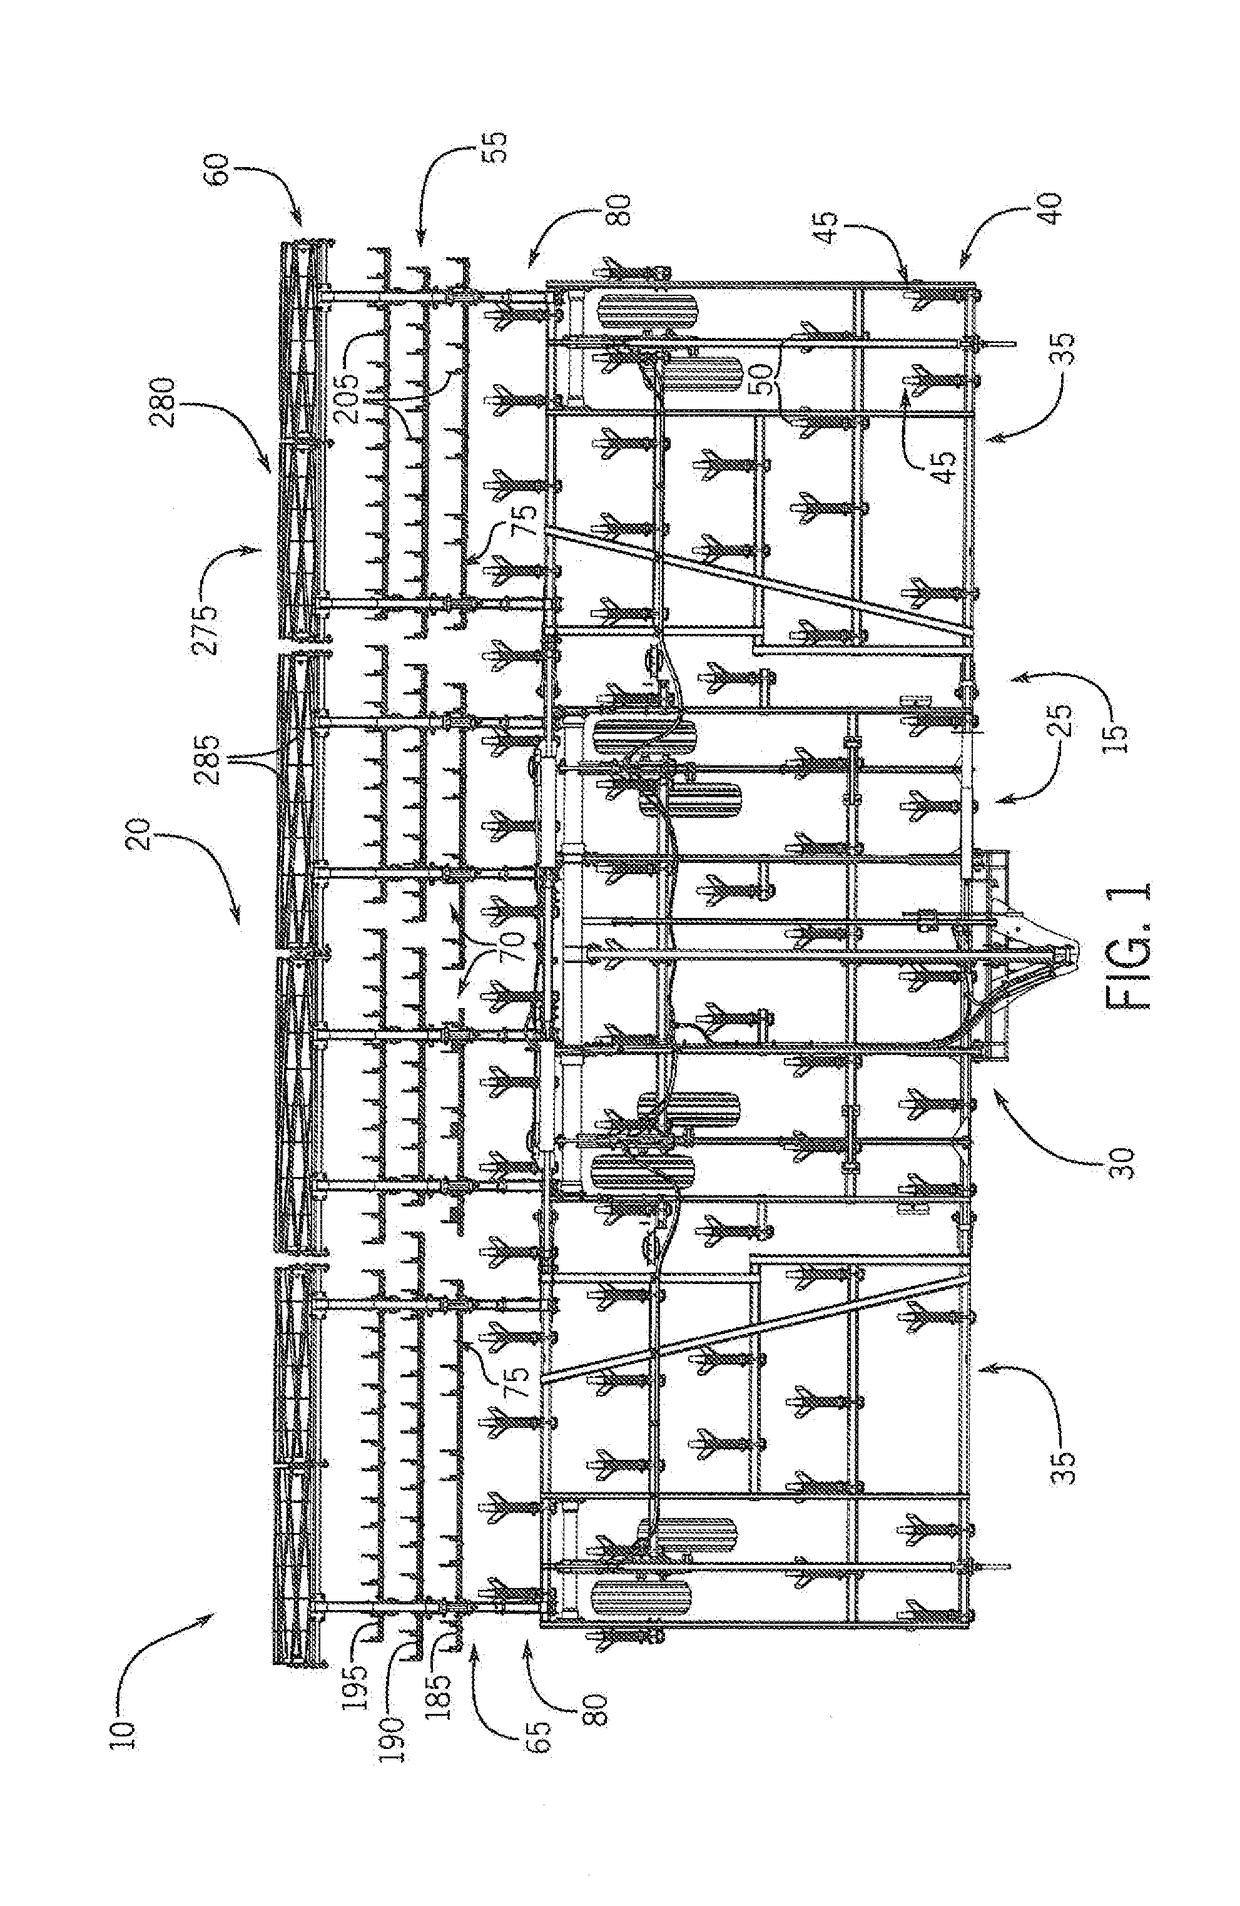 Agricultural Tillage Implement With Soil Finishing System Having Multiple Bar Harrow And Hydraulic Down Pressure For Finishing Tool